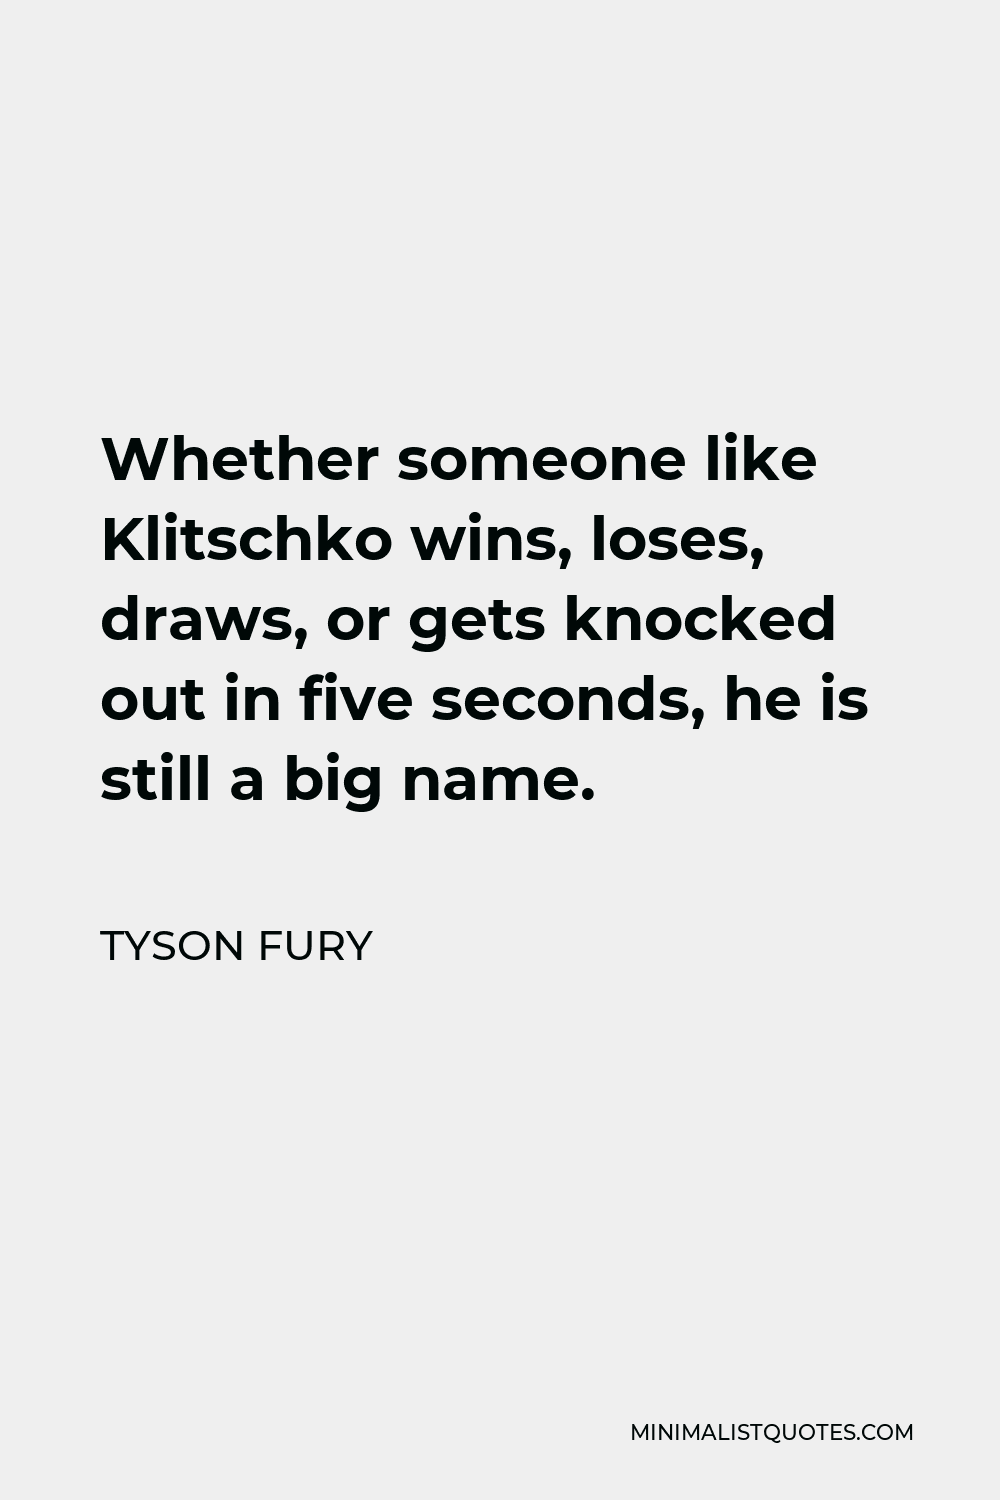 Tyson Fury Quote - Whether someone like Klitschko wins, loses, draws, or gets knocked out in five seconds, he is still a big name.